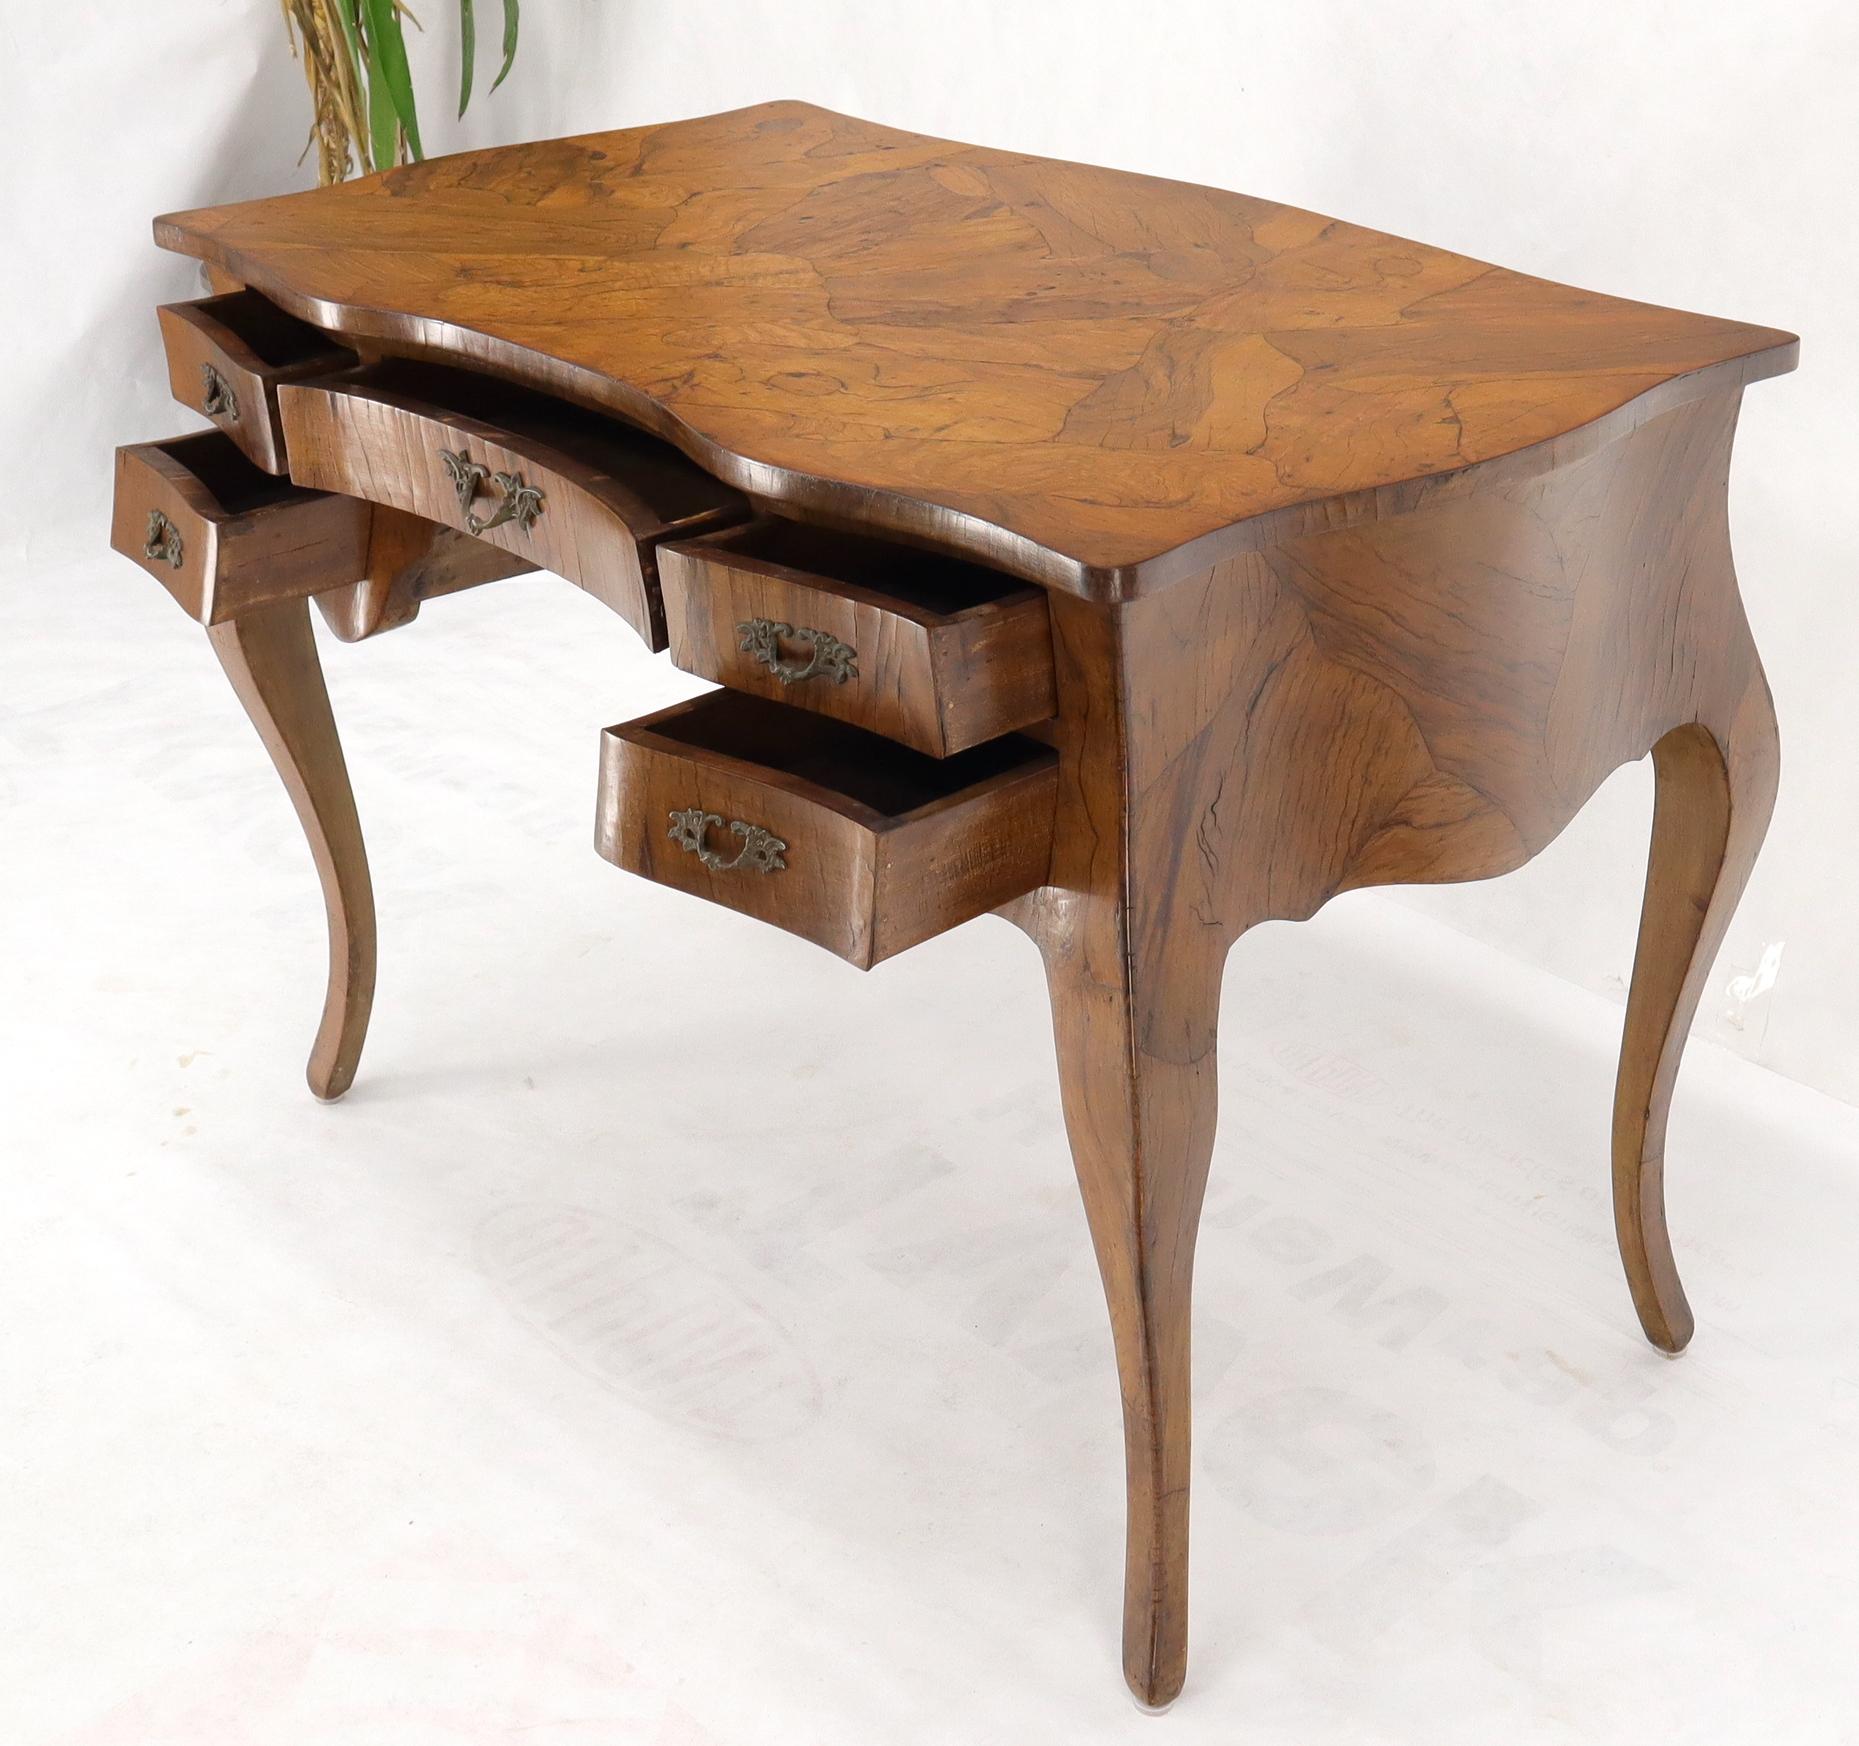 Lacquered Olive Burl Wood Heavy Patches Veneer Italian Bombay Shape Desk Writing Table